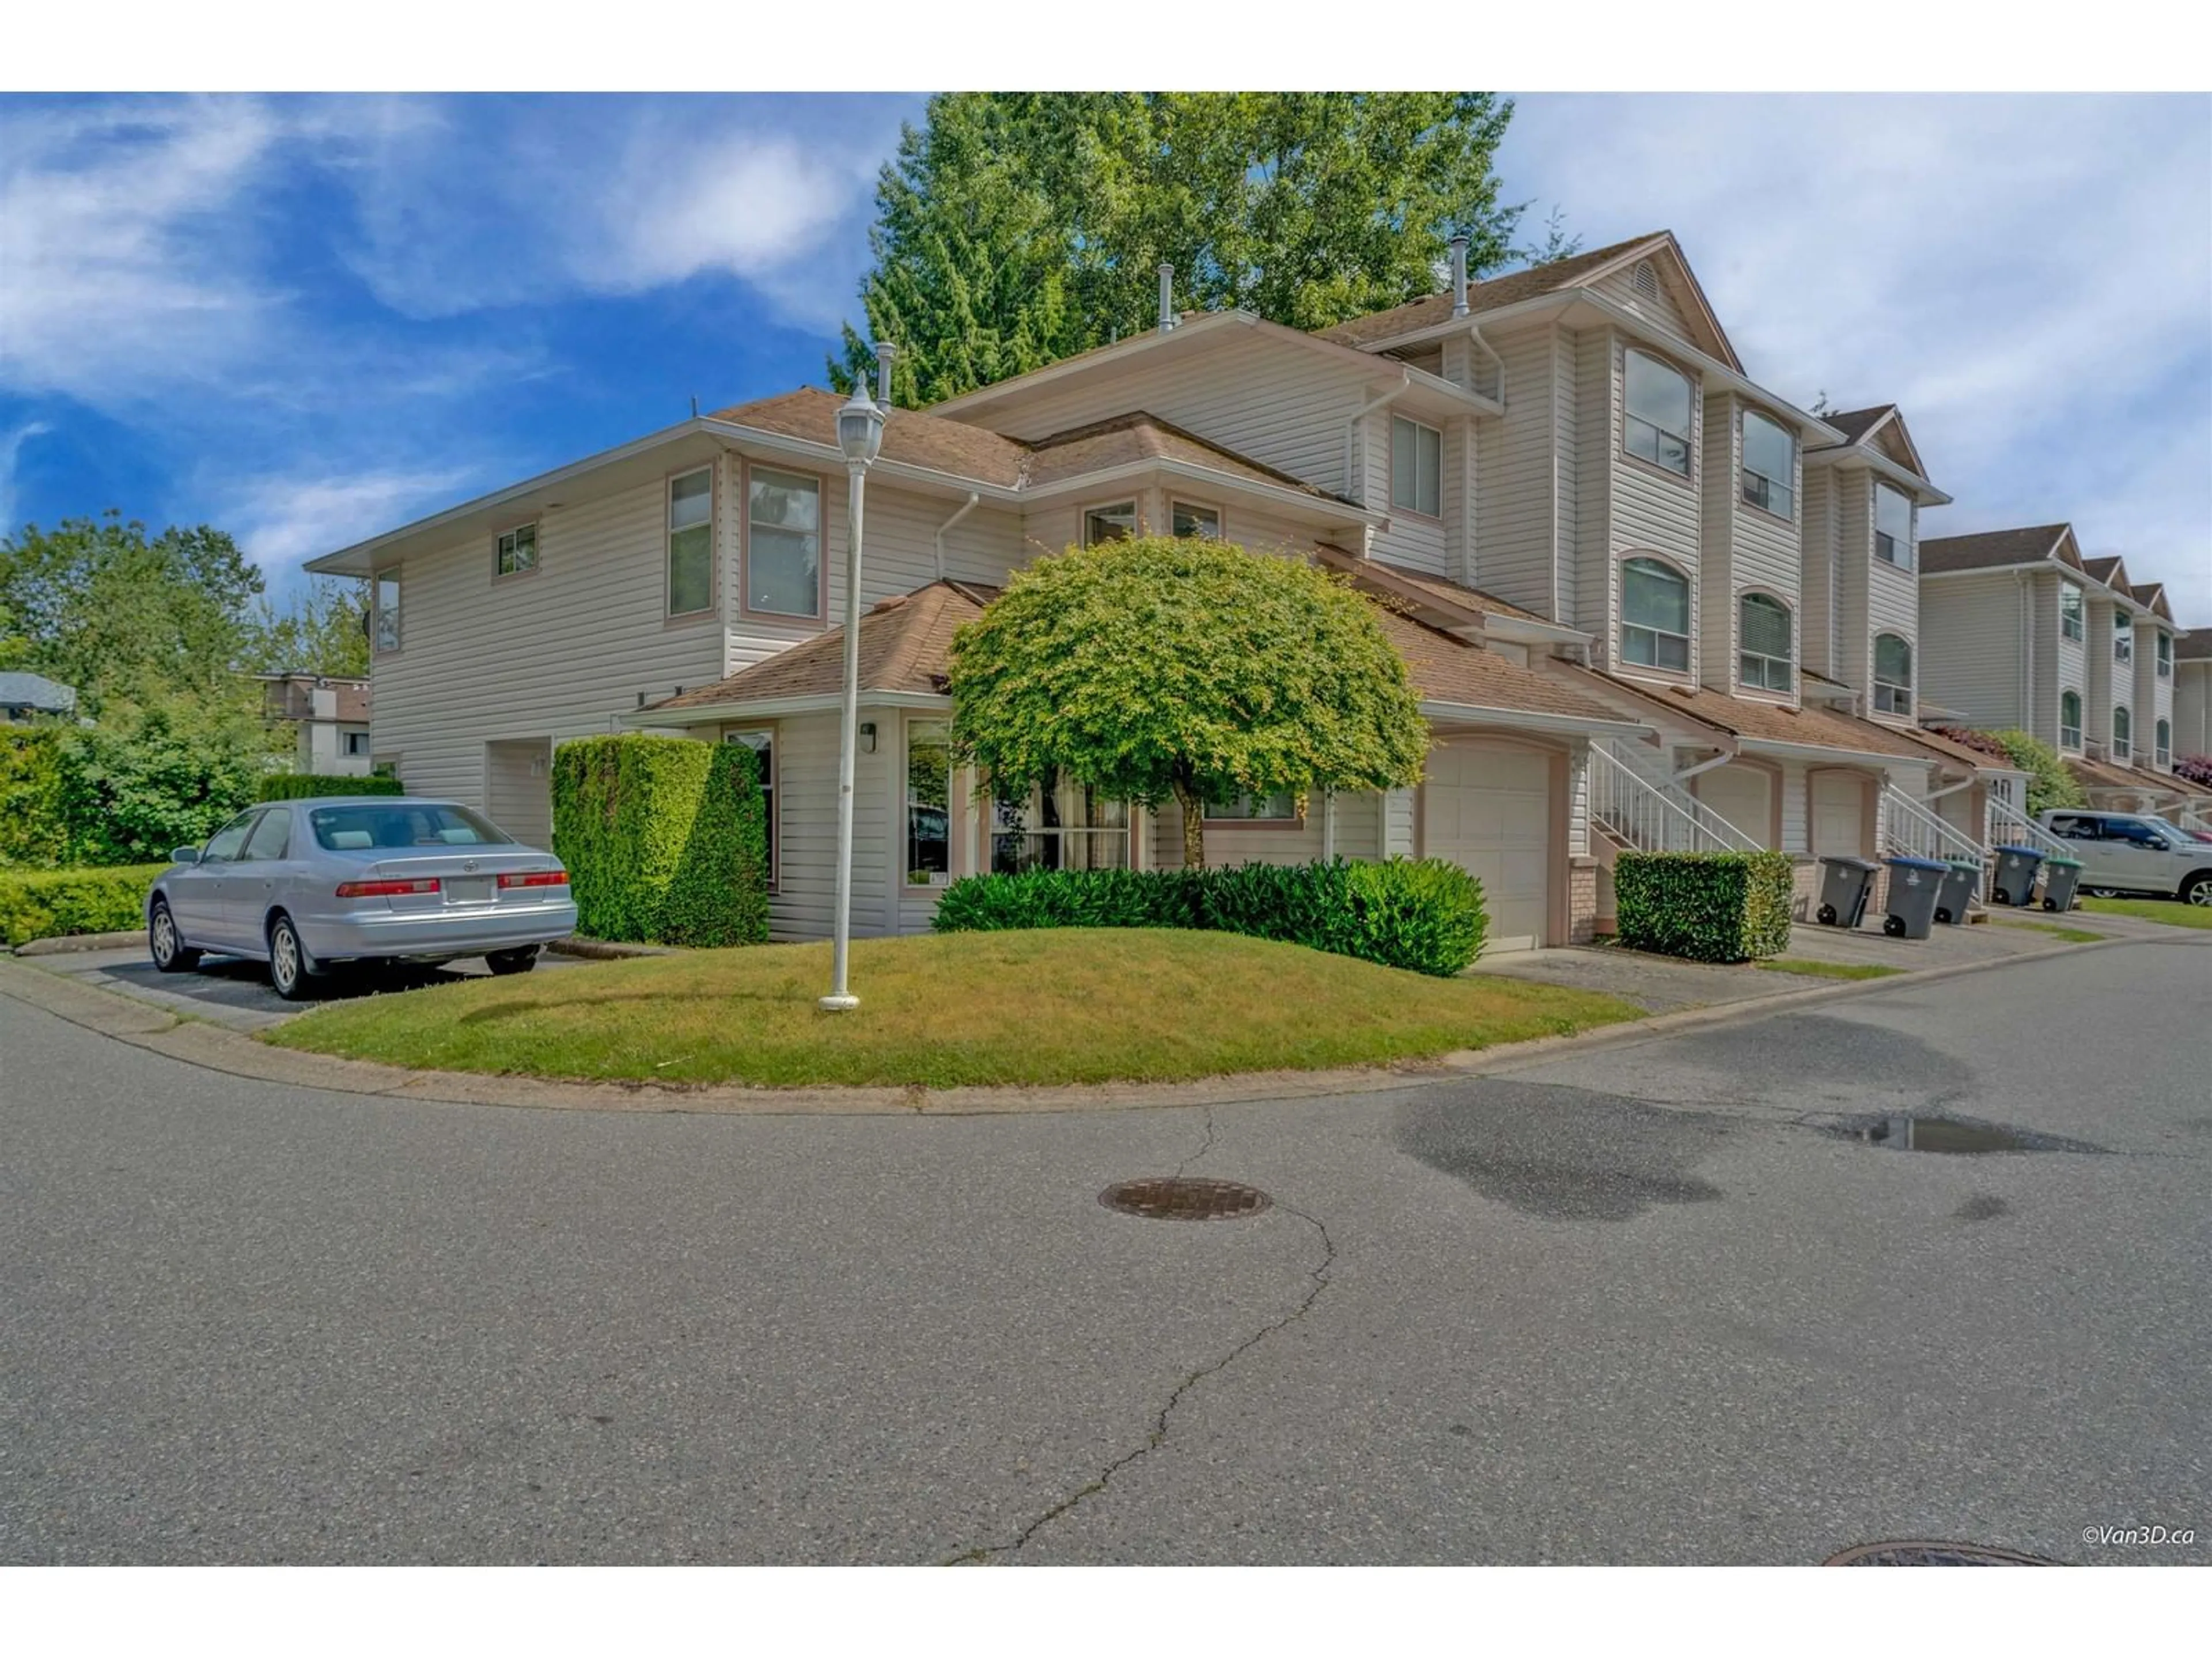 A pic from exterior of the house or condo for 12 7140 132 STREET, Surrey British Columbia V3W1J5